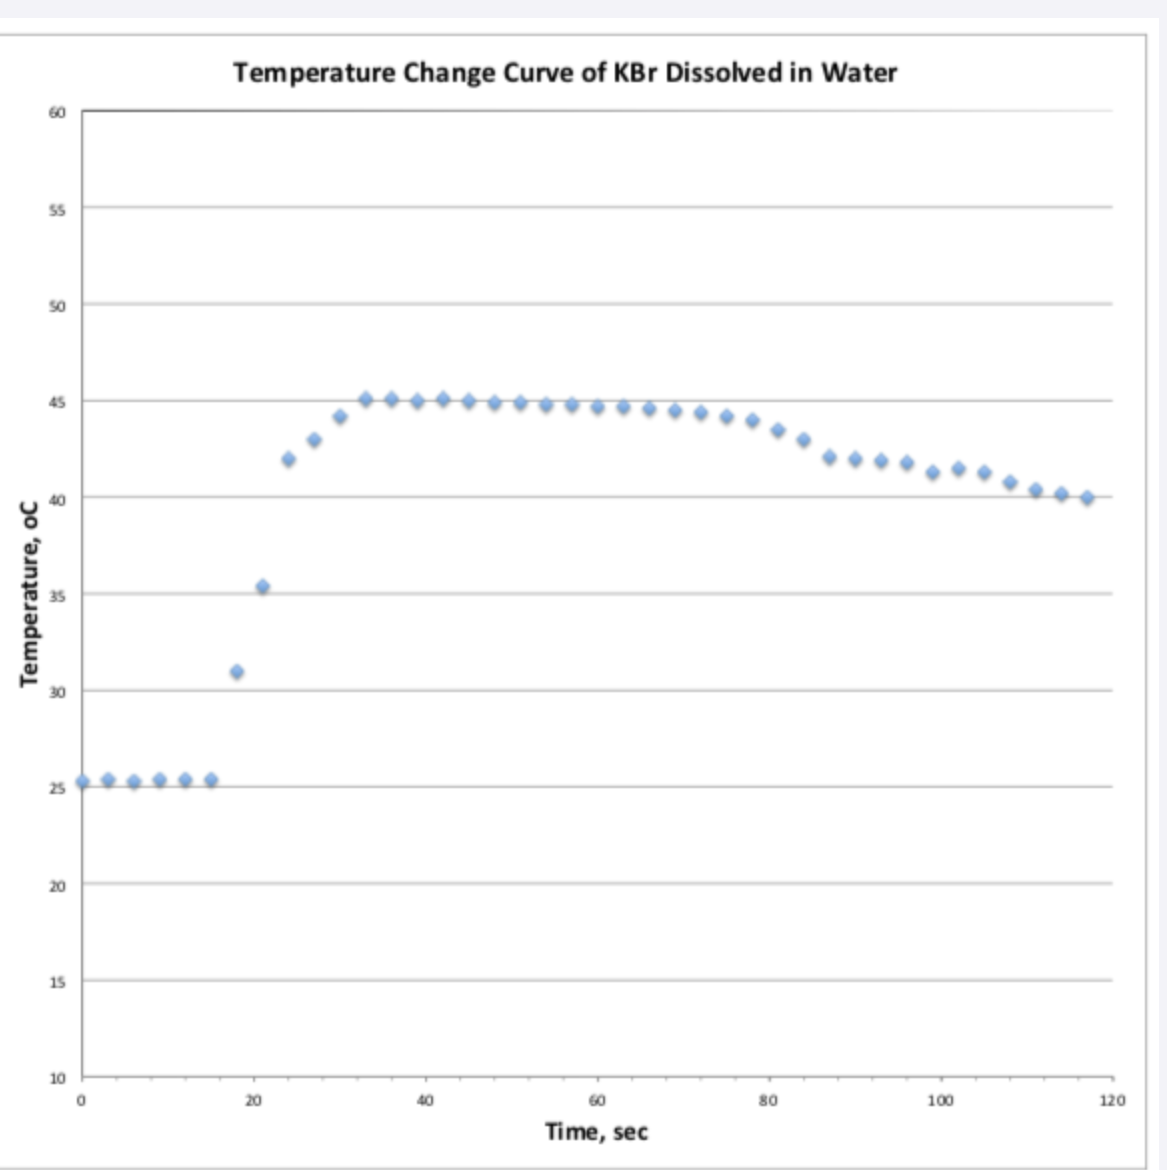 Temperature Change Curve of KBr Dissolved in Water
45
25
20
15
10
20
40
60
80
100
120
Time, sec
Temperature, oC
